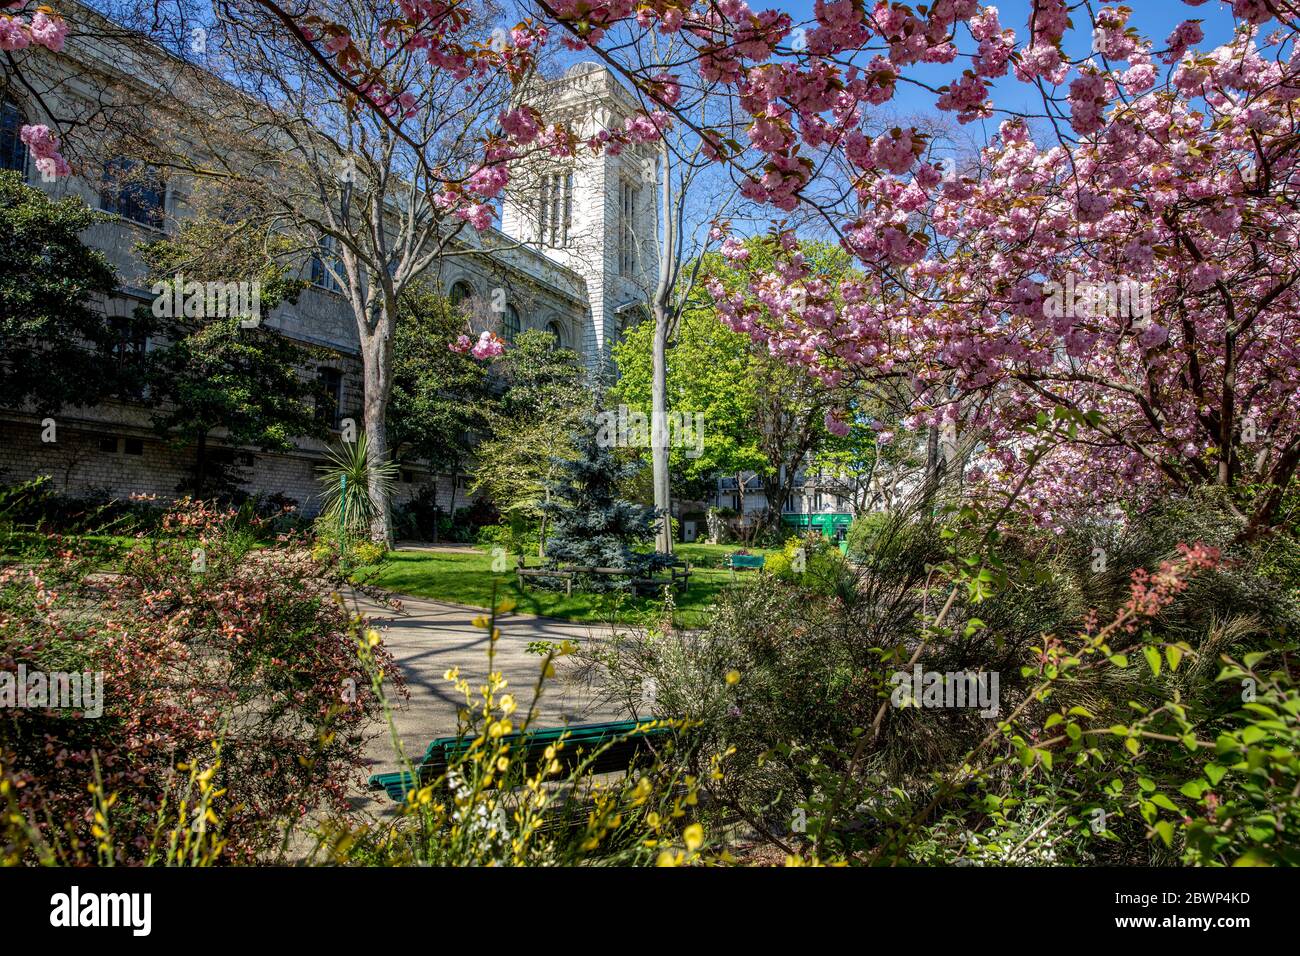 Paris, France - April 1, 2020: Spring in Paris. 'College de France' tower (Latin quarter) and blossoming pink trees Stock Photo